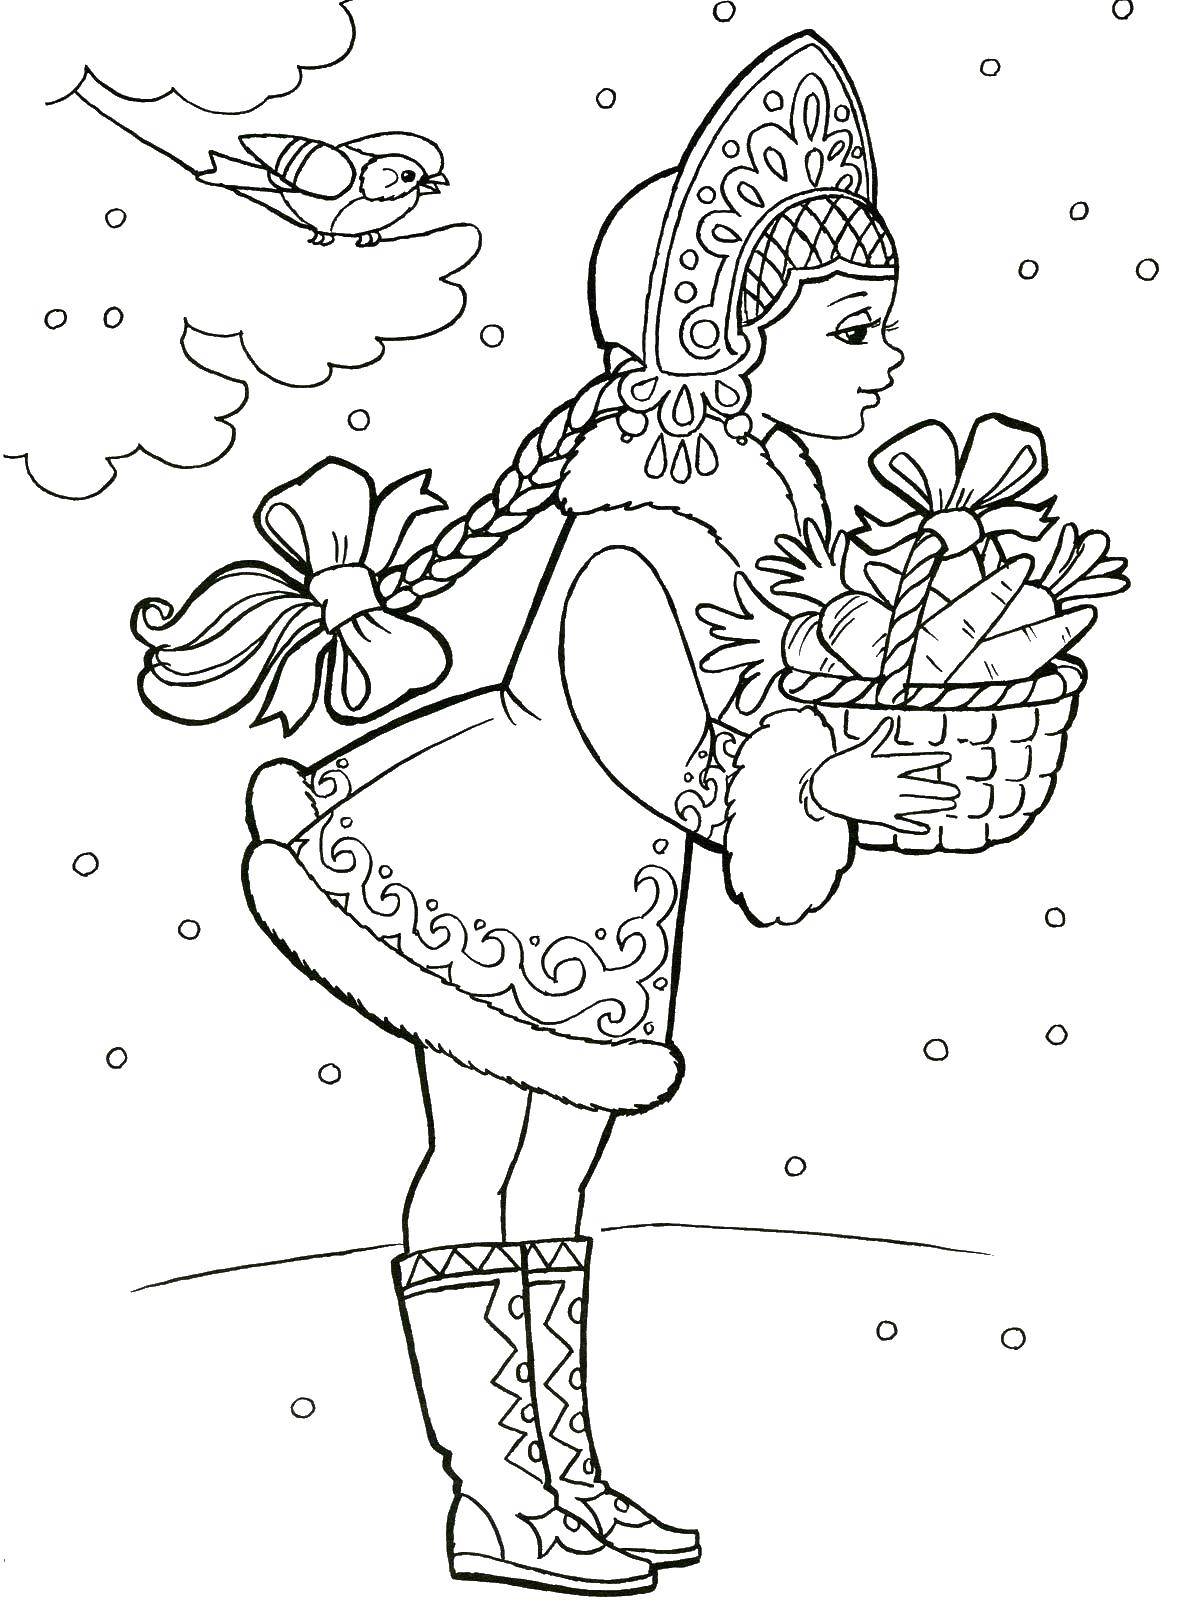 Coloring Maiden. Category new year. Tags:  New Year, Santa Claus, gifts, snow maiden.